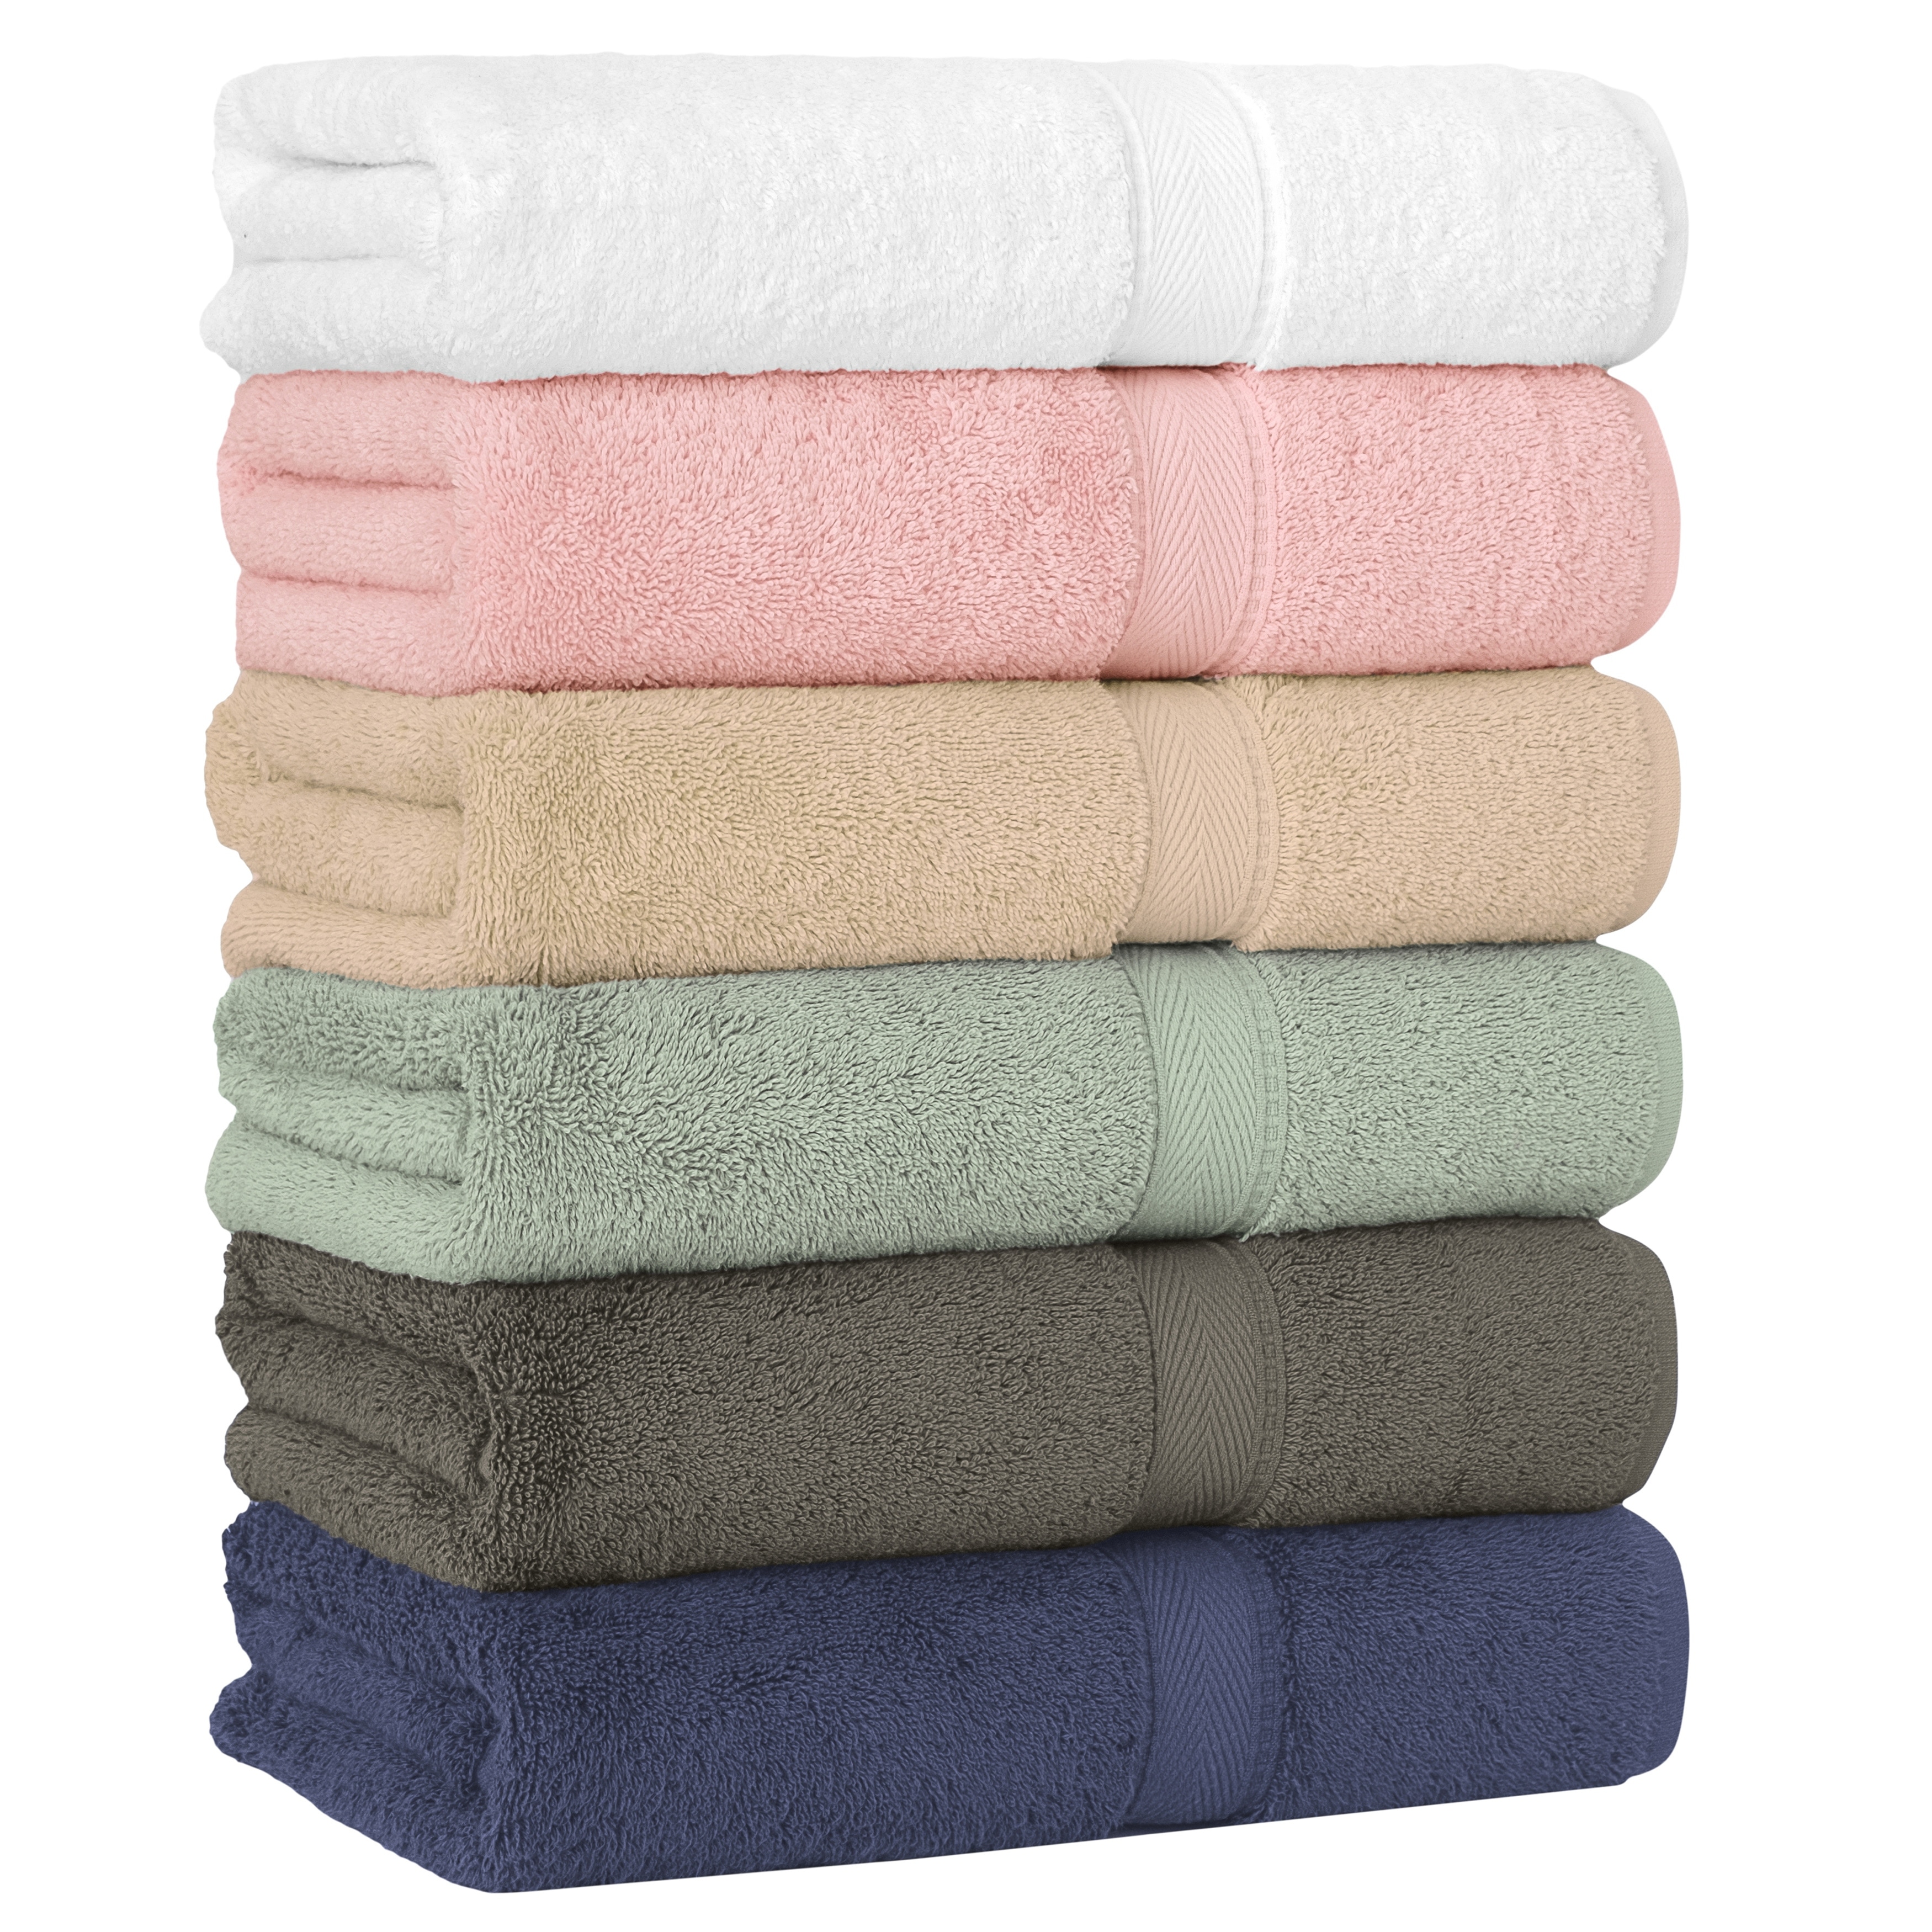 https://ak1.ostkcdn.com/images/products/is/images/direct/e0a1bac4b1ffe6b78bd4019c6c356bf181172fe9/Authentic-Hotel-and-Spa-Turkish-Cotton-6-piece-Towel-Set.jpg